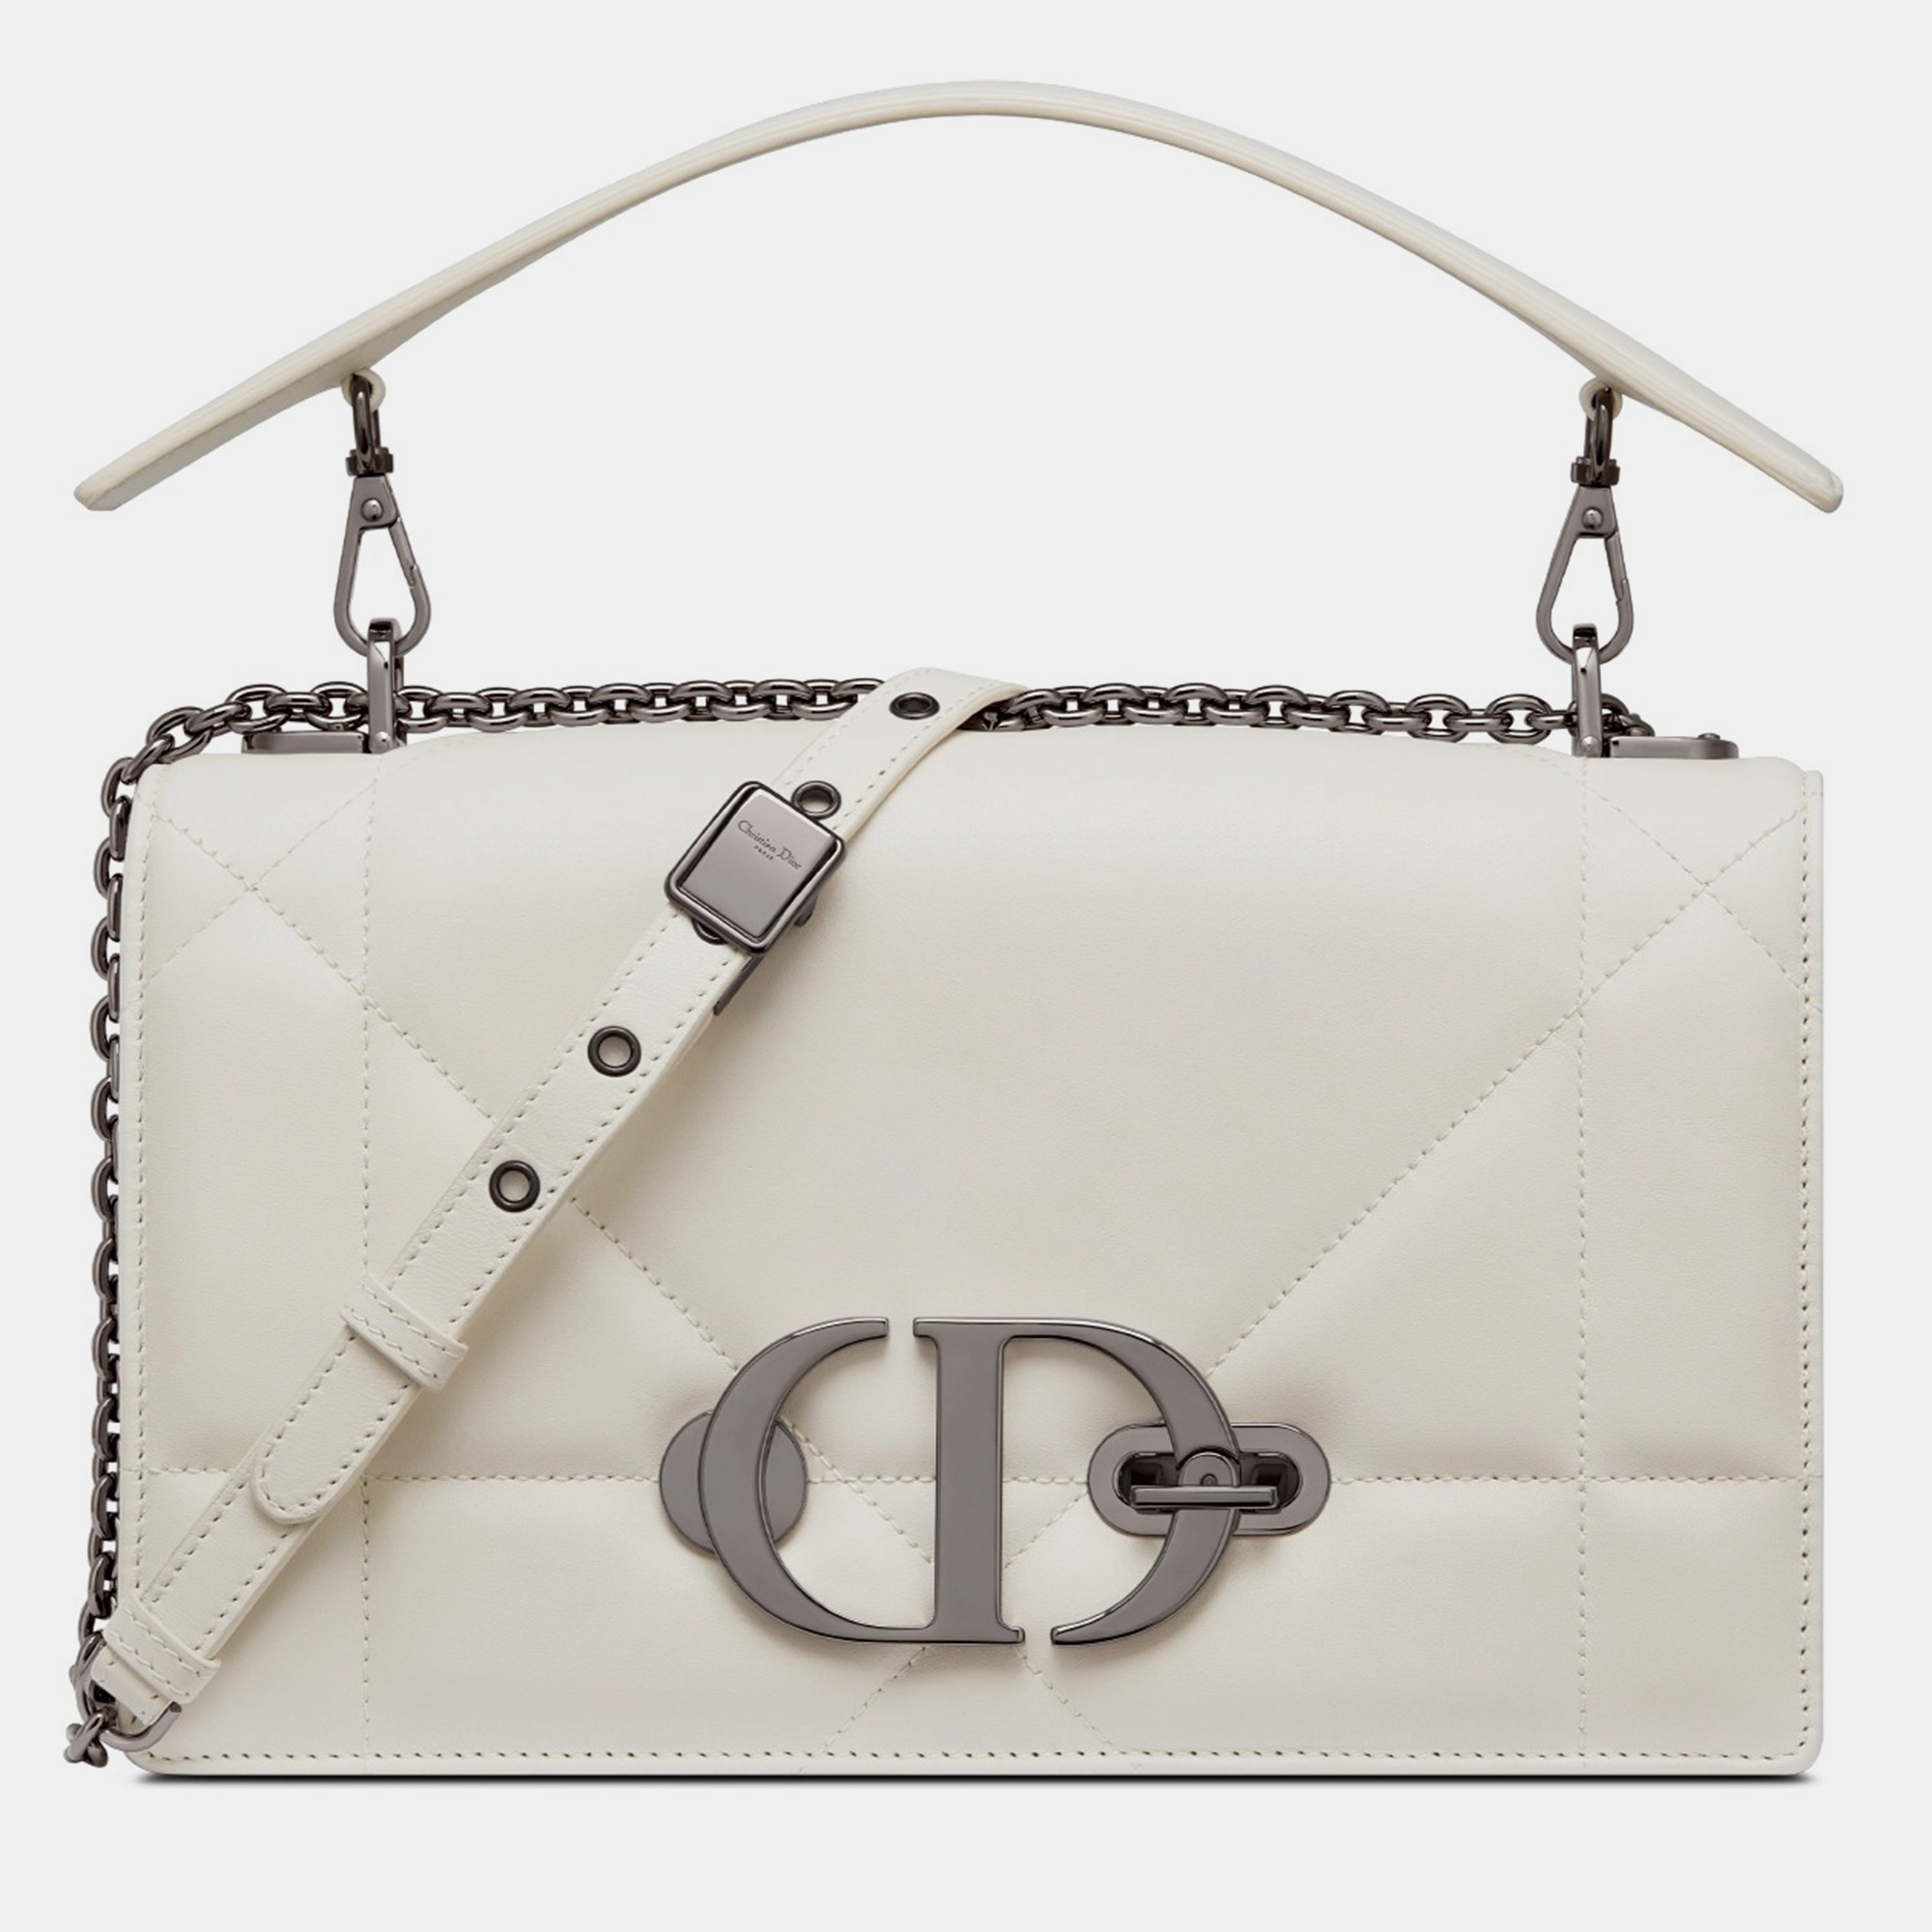 Christian dior white lambskin 30 montaigne chain bag with handle